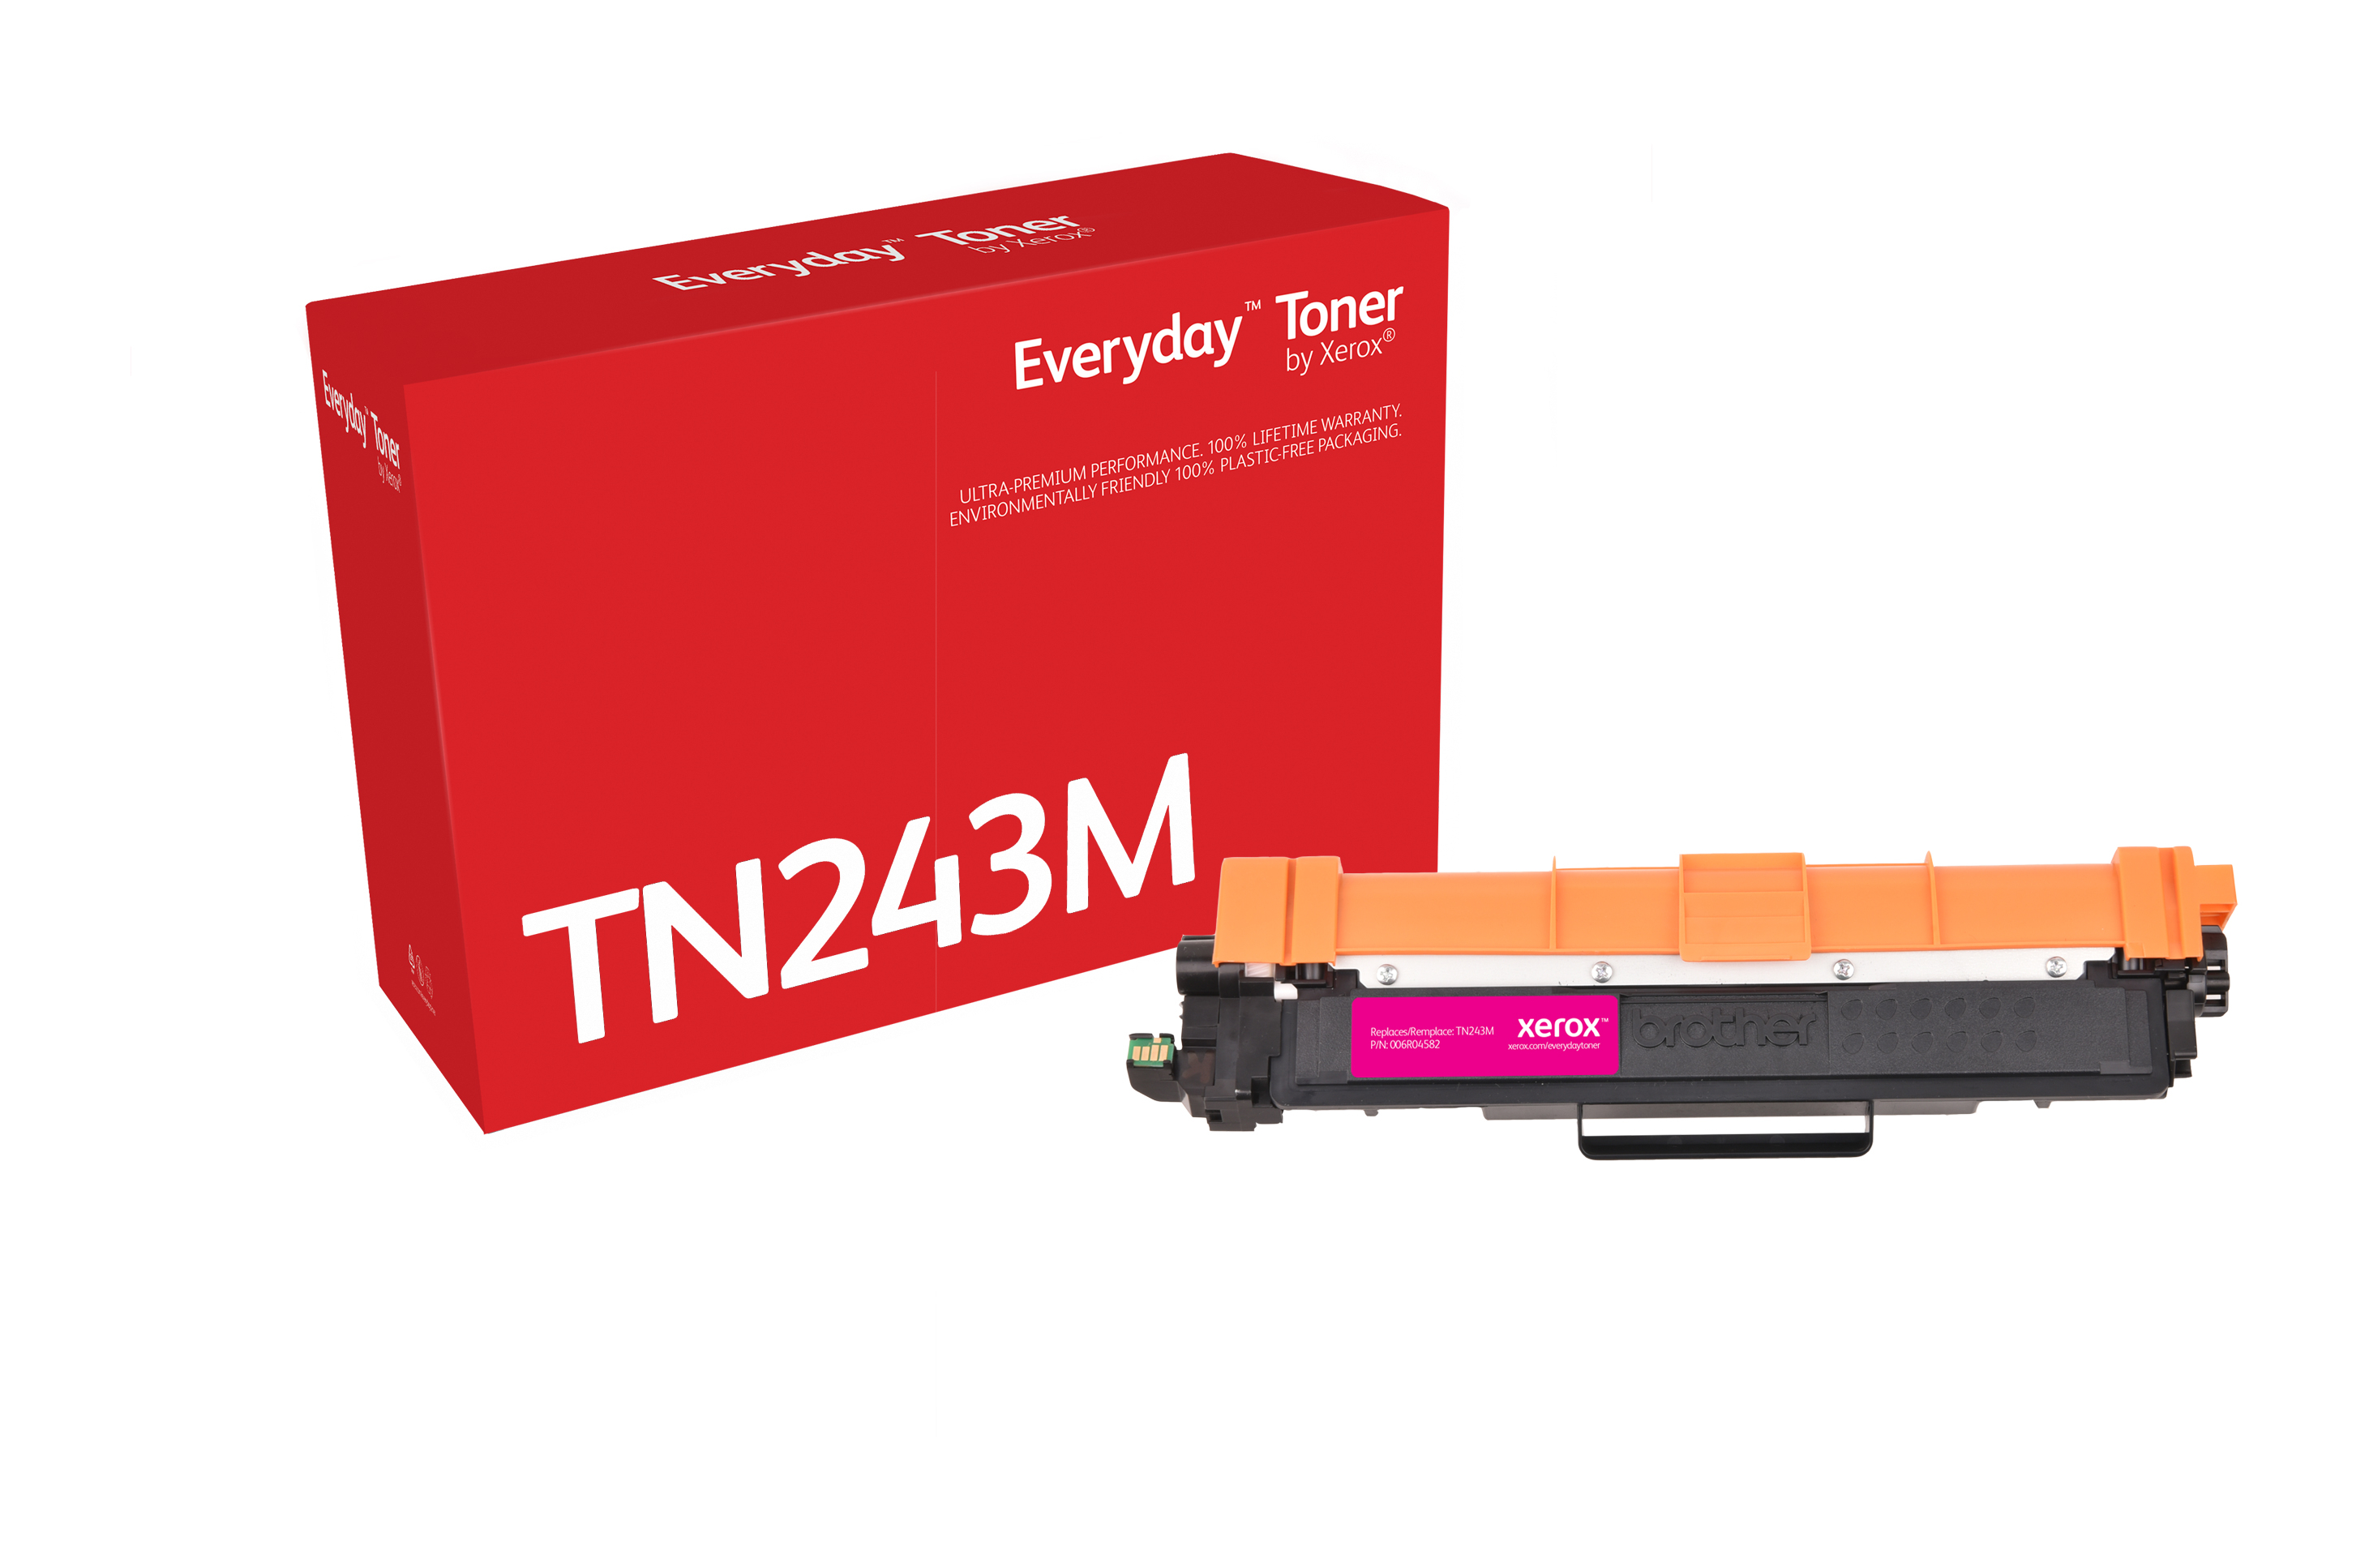 Toner Everyday Magenta compatible avec Brother TN-243M, Capacité standard  006R04582 by Xerox